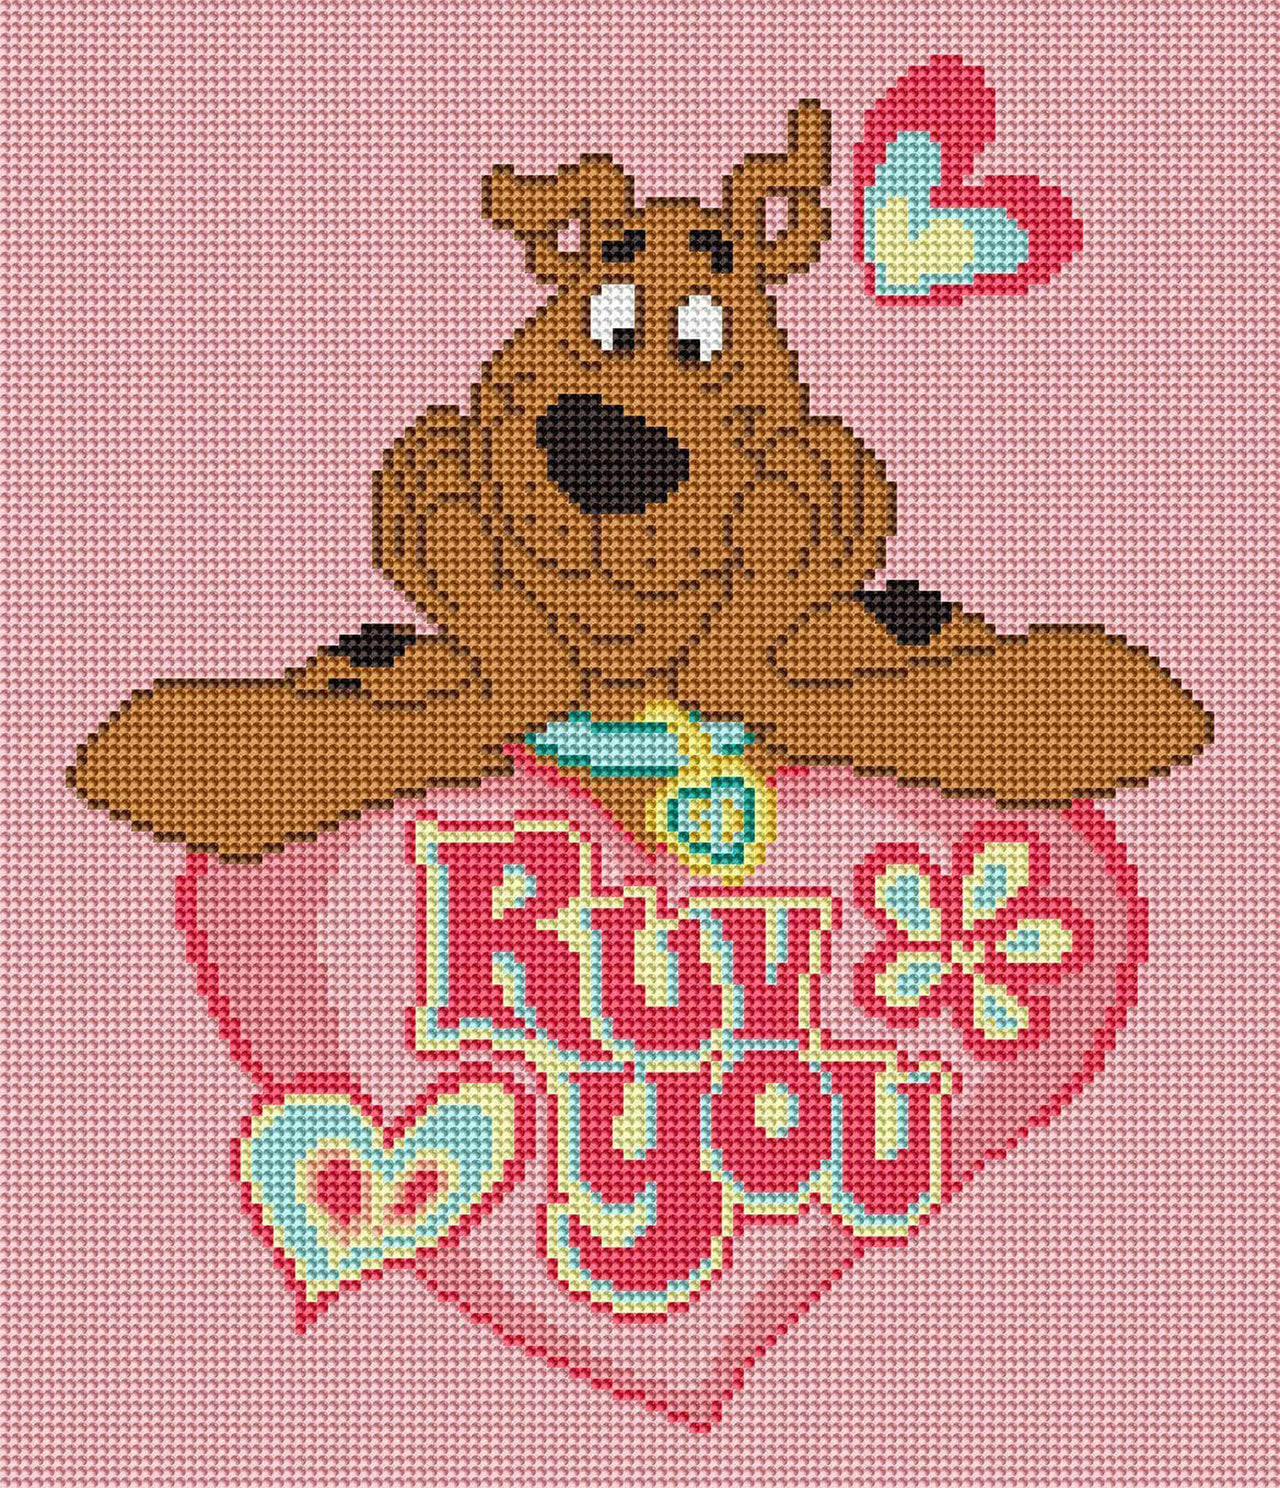 Diamond Painting Scooby-Doo™ Ruv You 13" x 15" (33cm x 38cm) / Round with 13 Colors including 1 AB / 15,912